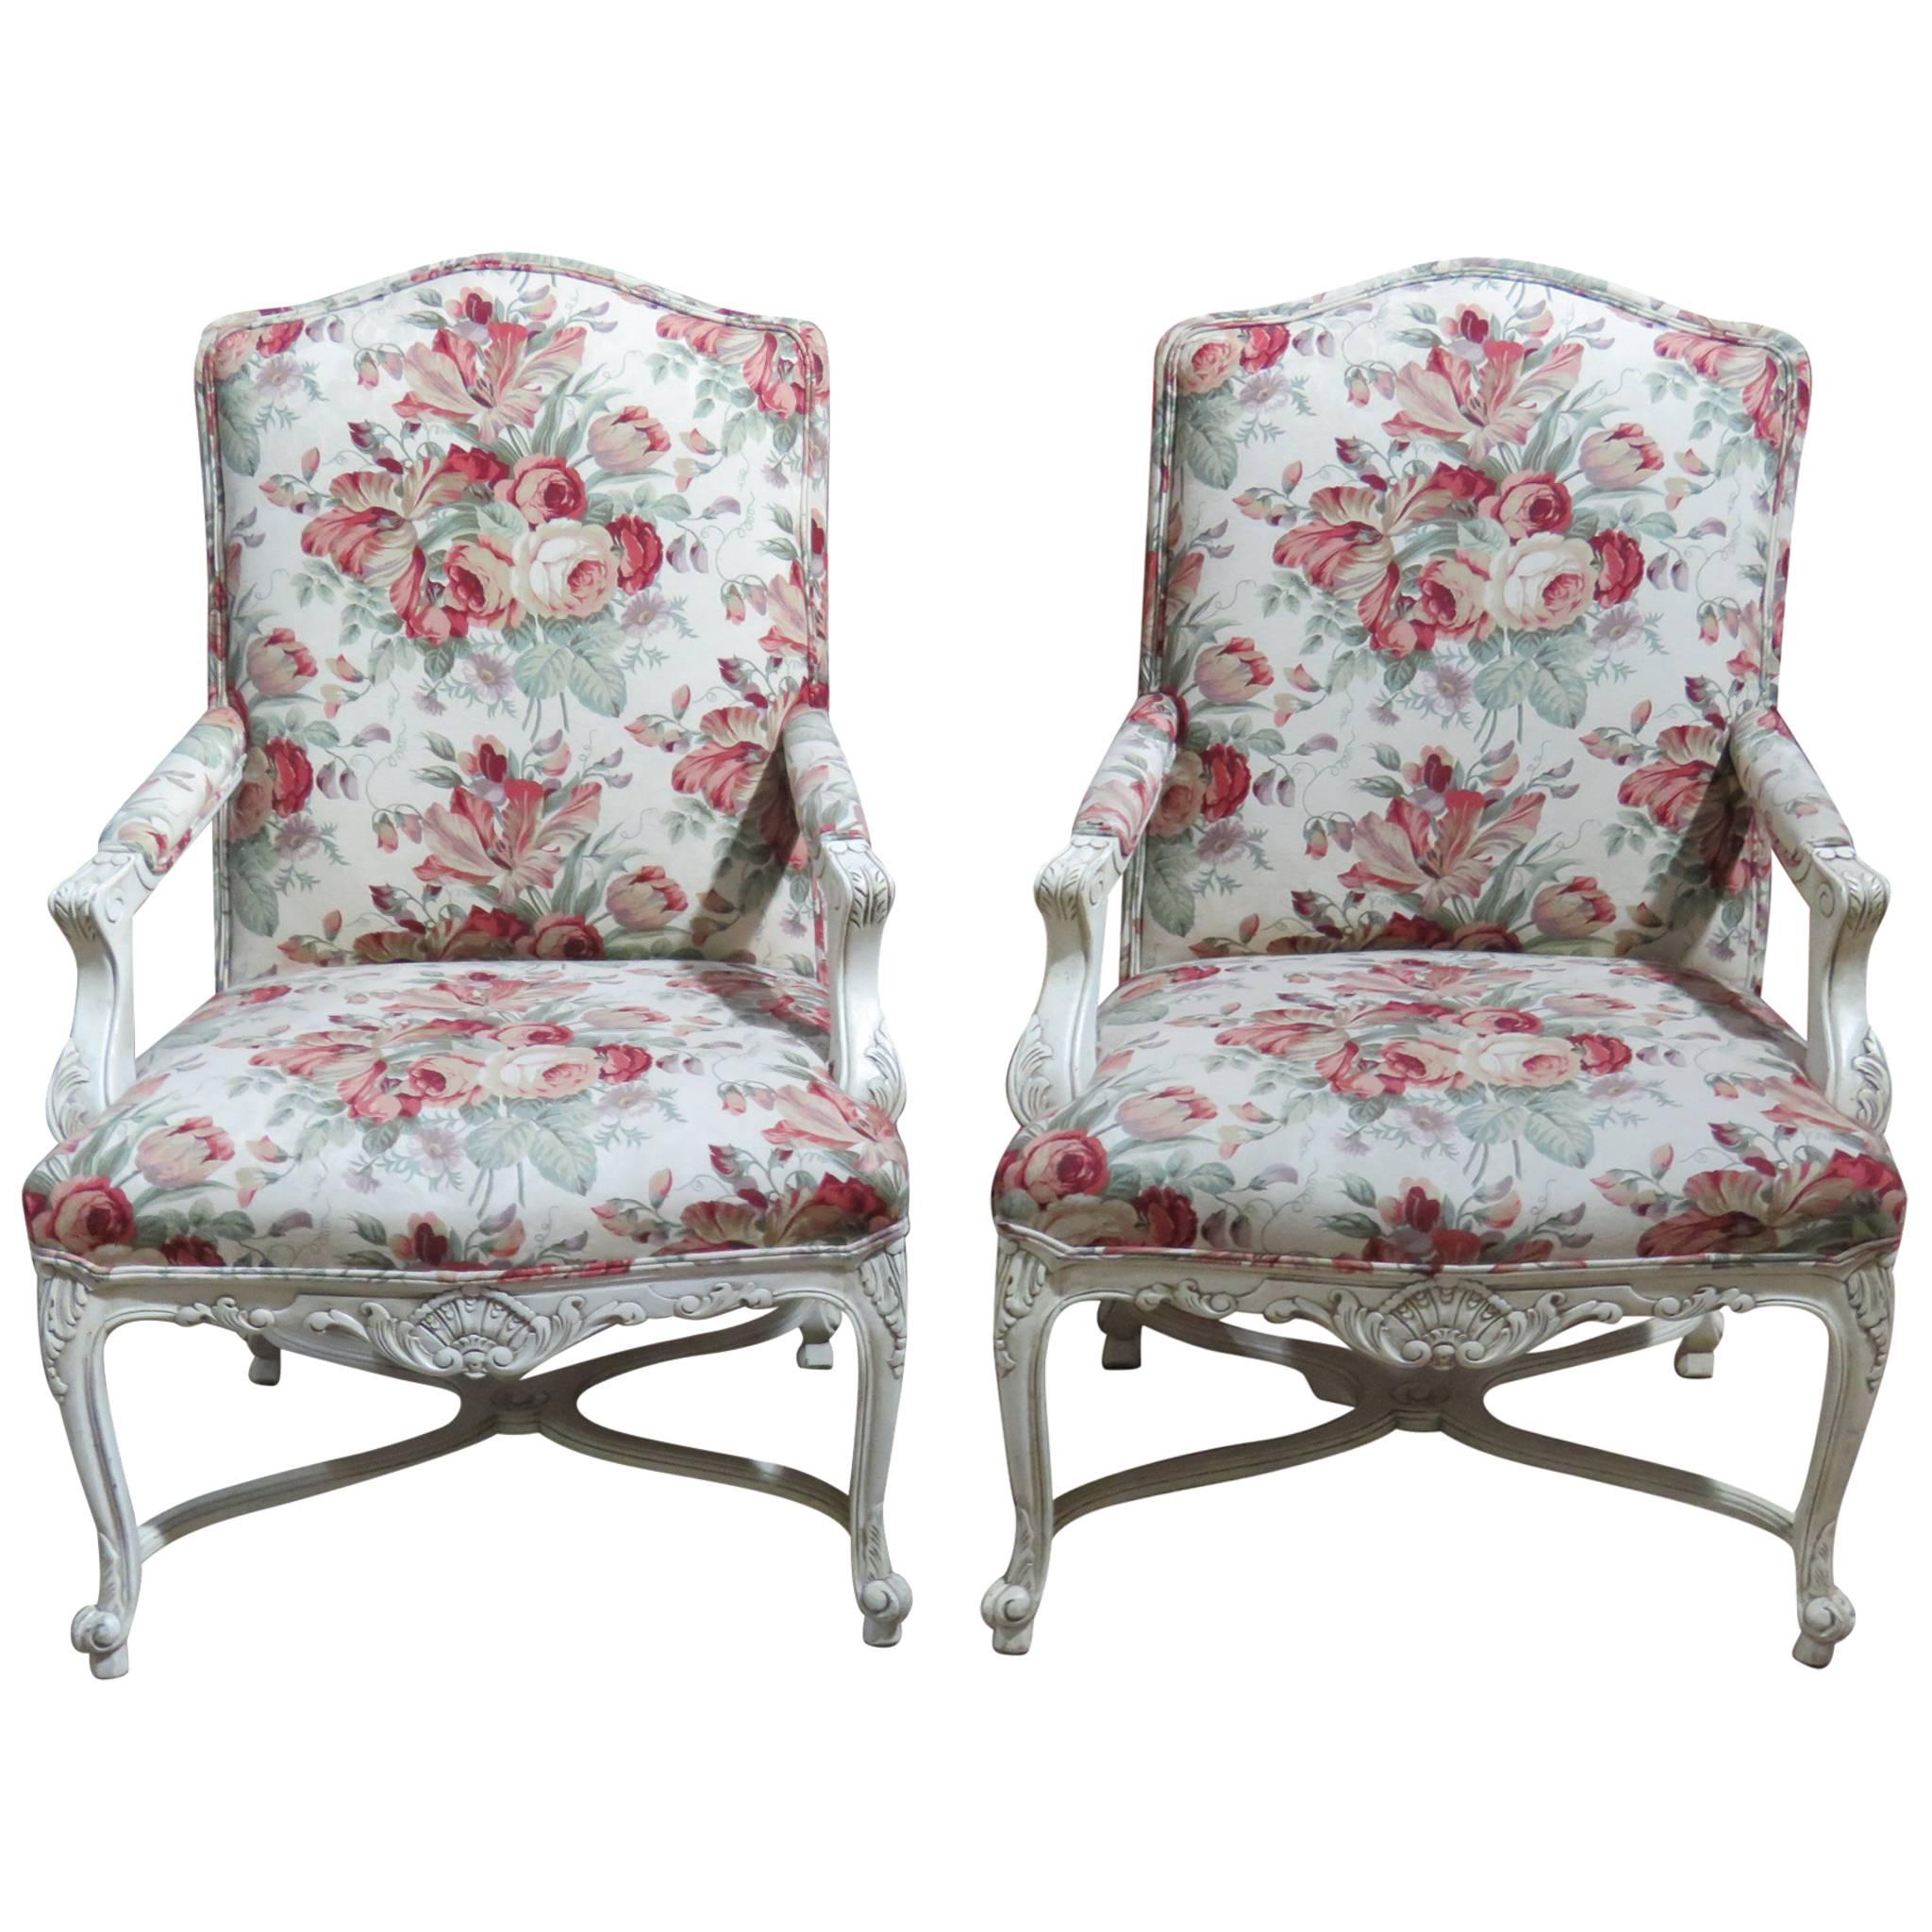 Pair of Louis XVI Style Cream Painted Upholstered Fauteuils Bergere Arm Chairs